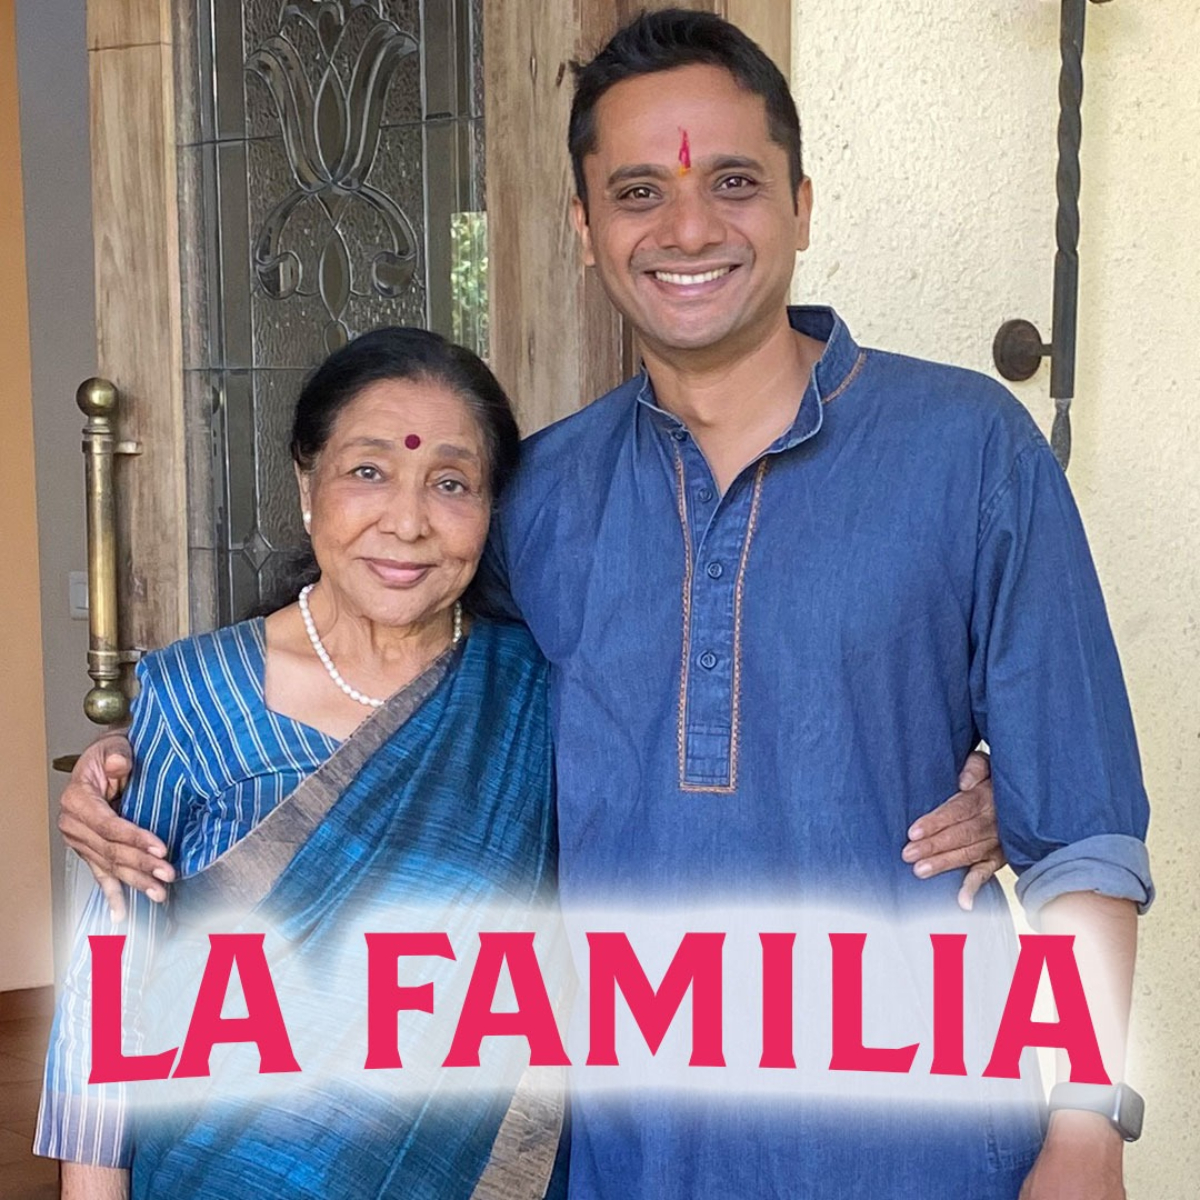 La Familia: Asha Bhosle’s grandson Chintoo reveals that she loves to cook; Says ‘She enjoys the simple food’